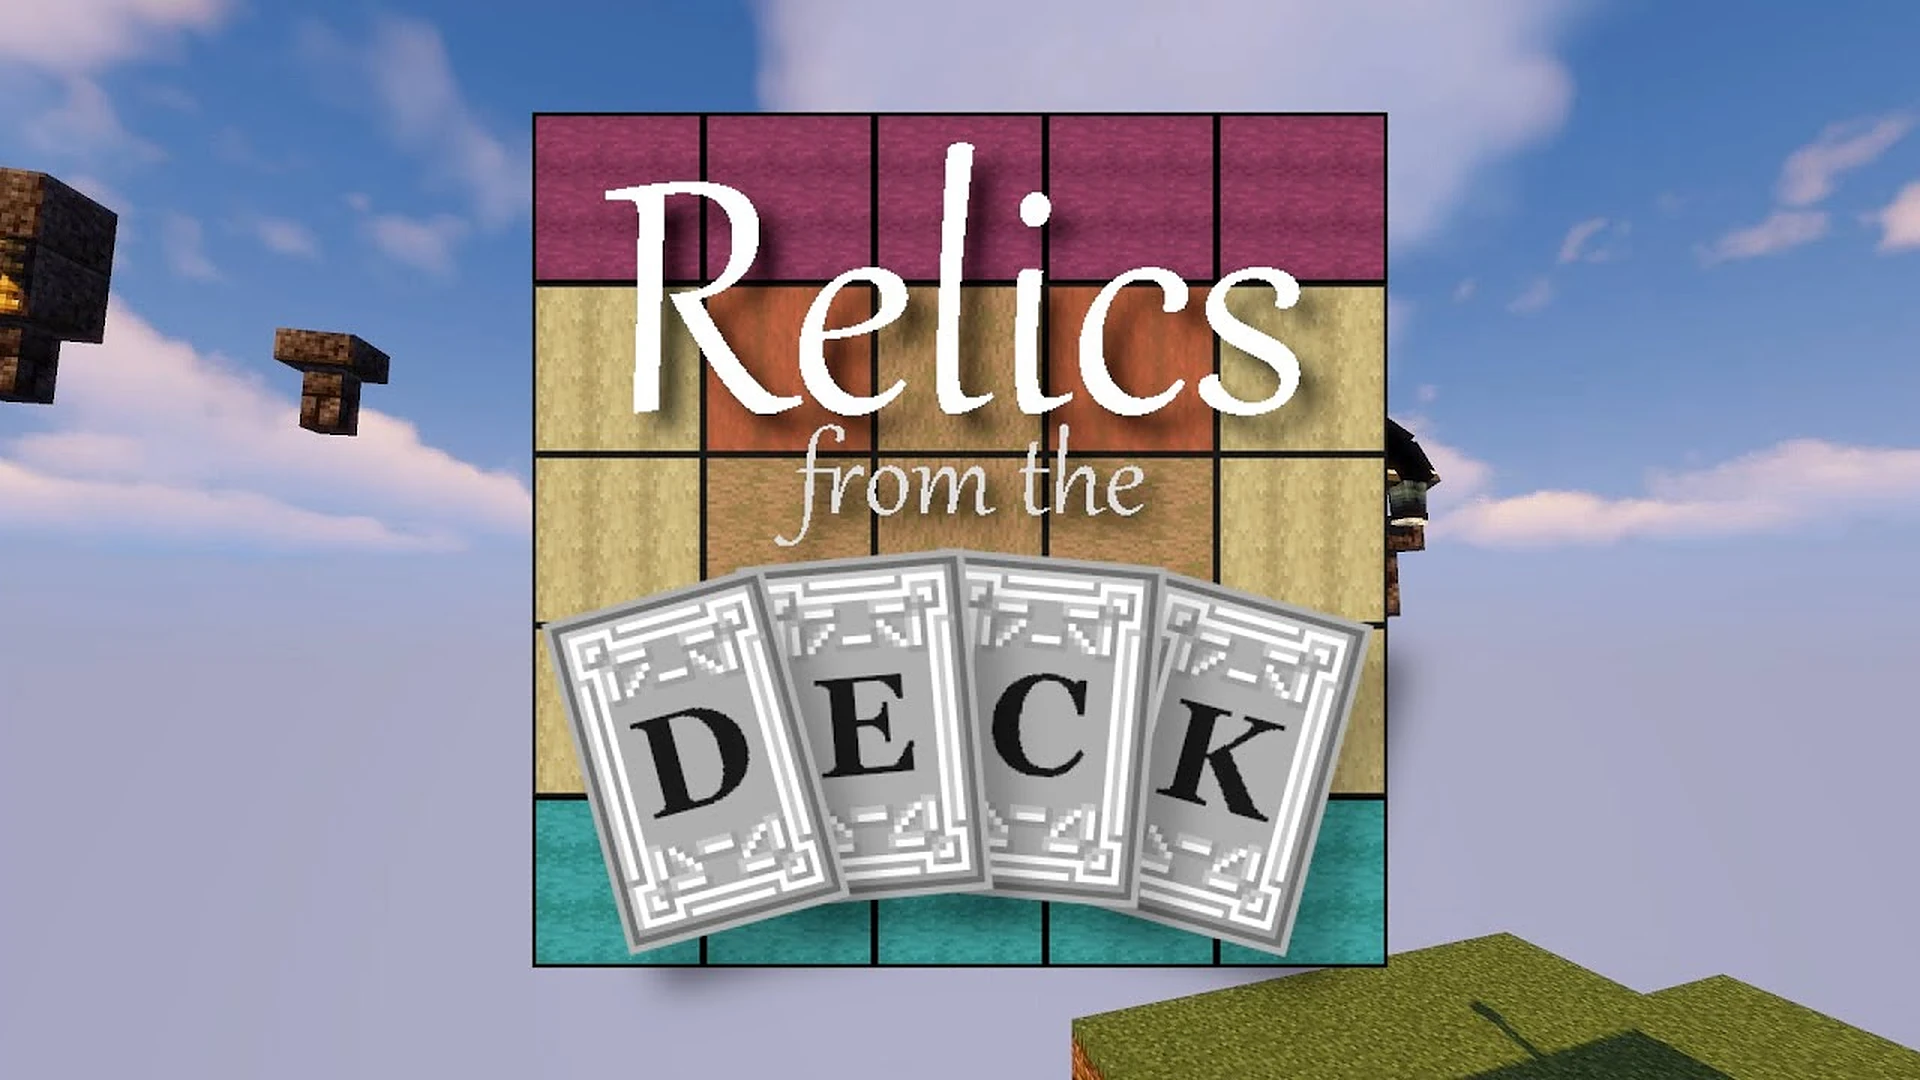 Baixar Relics from the Deck para Minecraft 1.17.1